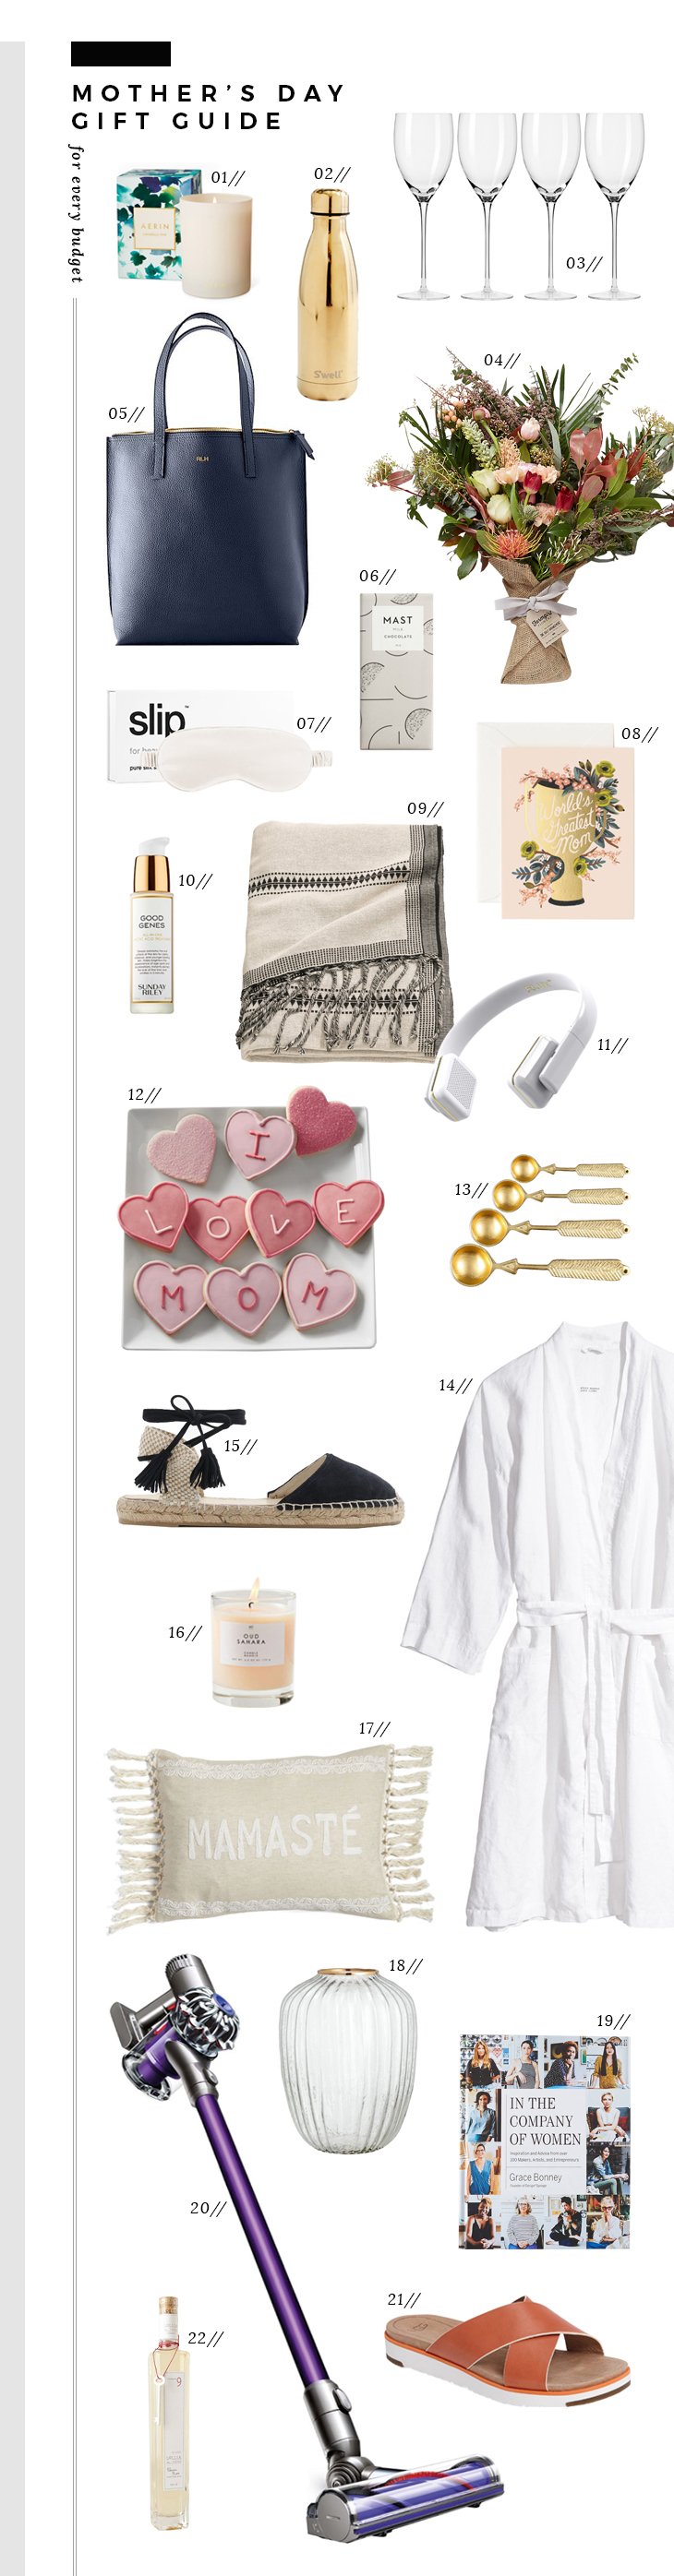 Awsome Mother's Day Gift Guide